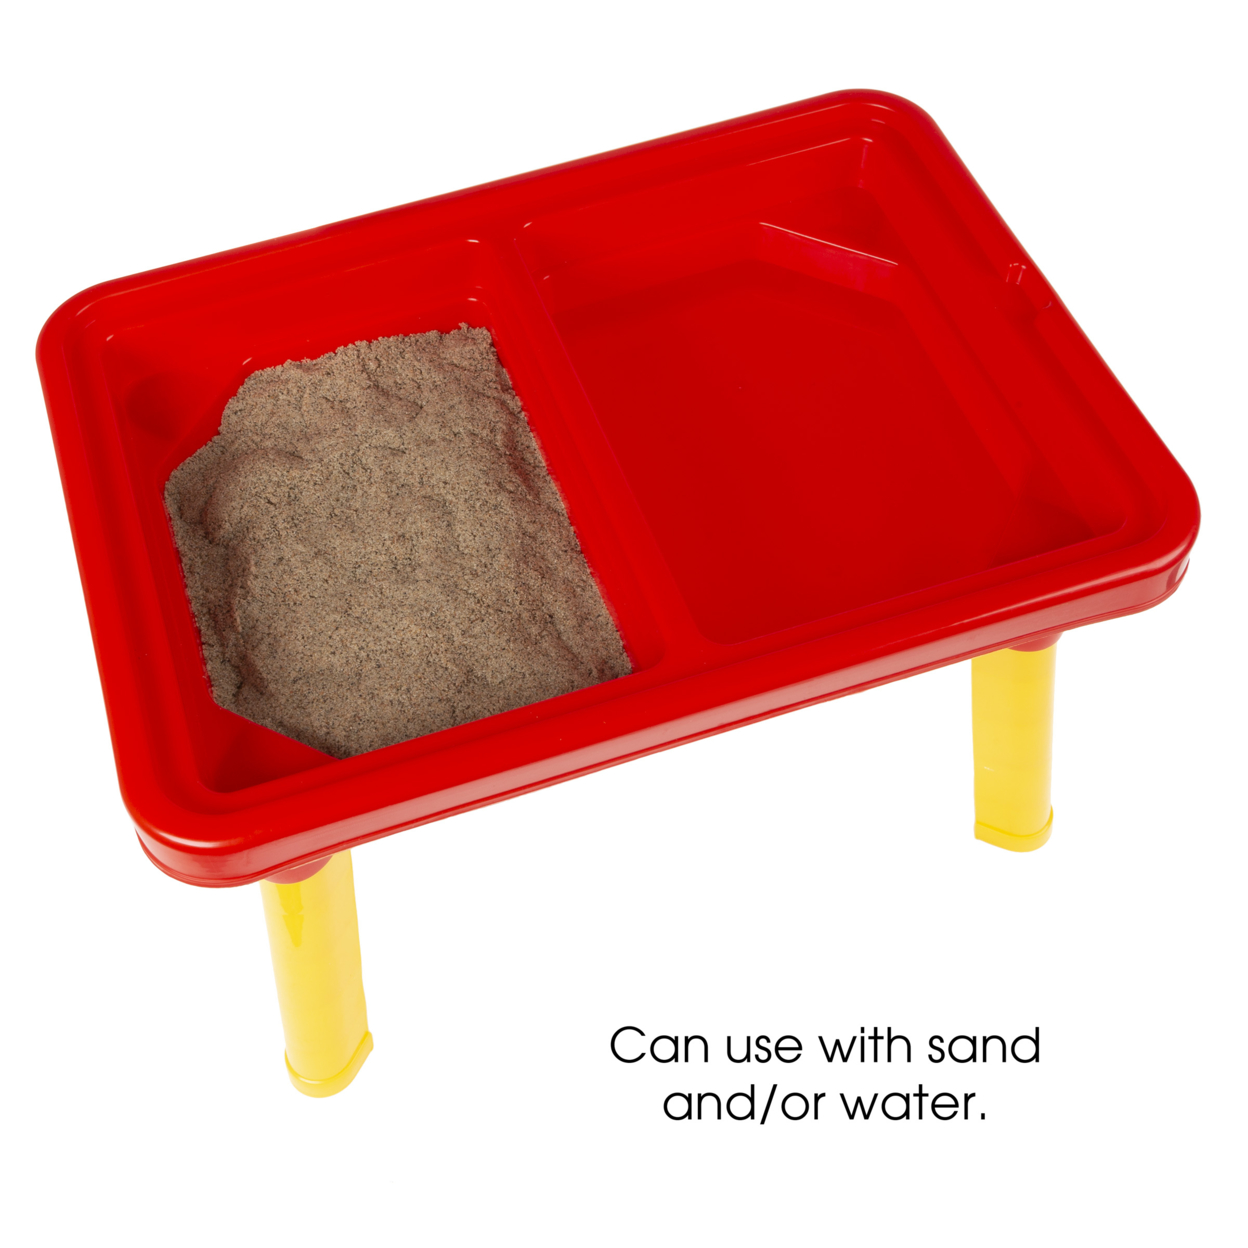 Water Or Sand Sensory Table With Lid And Toys - Portable Covered Activity Playset For The Beach, Backyard Or Classroom